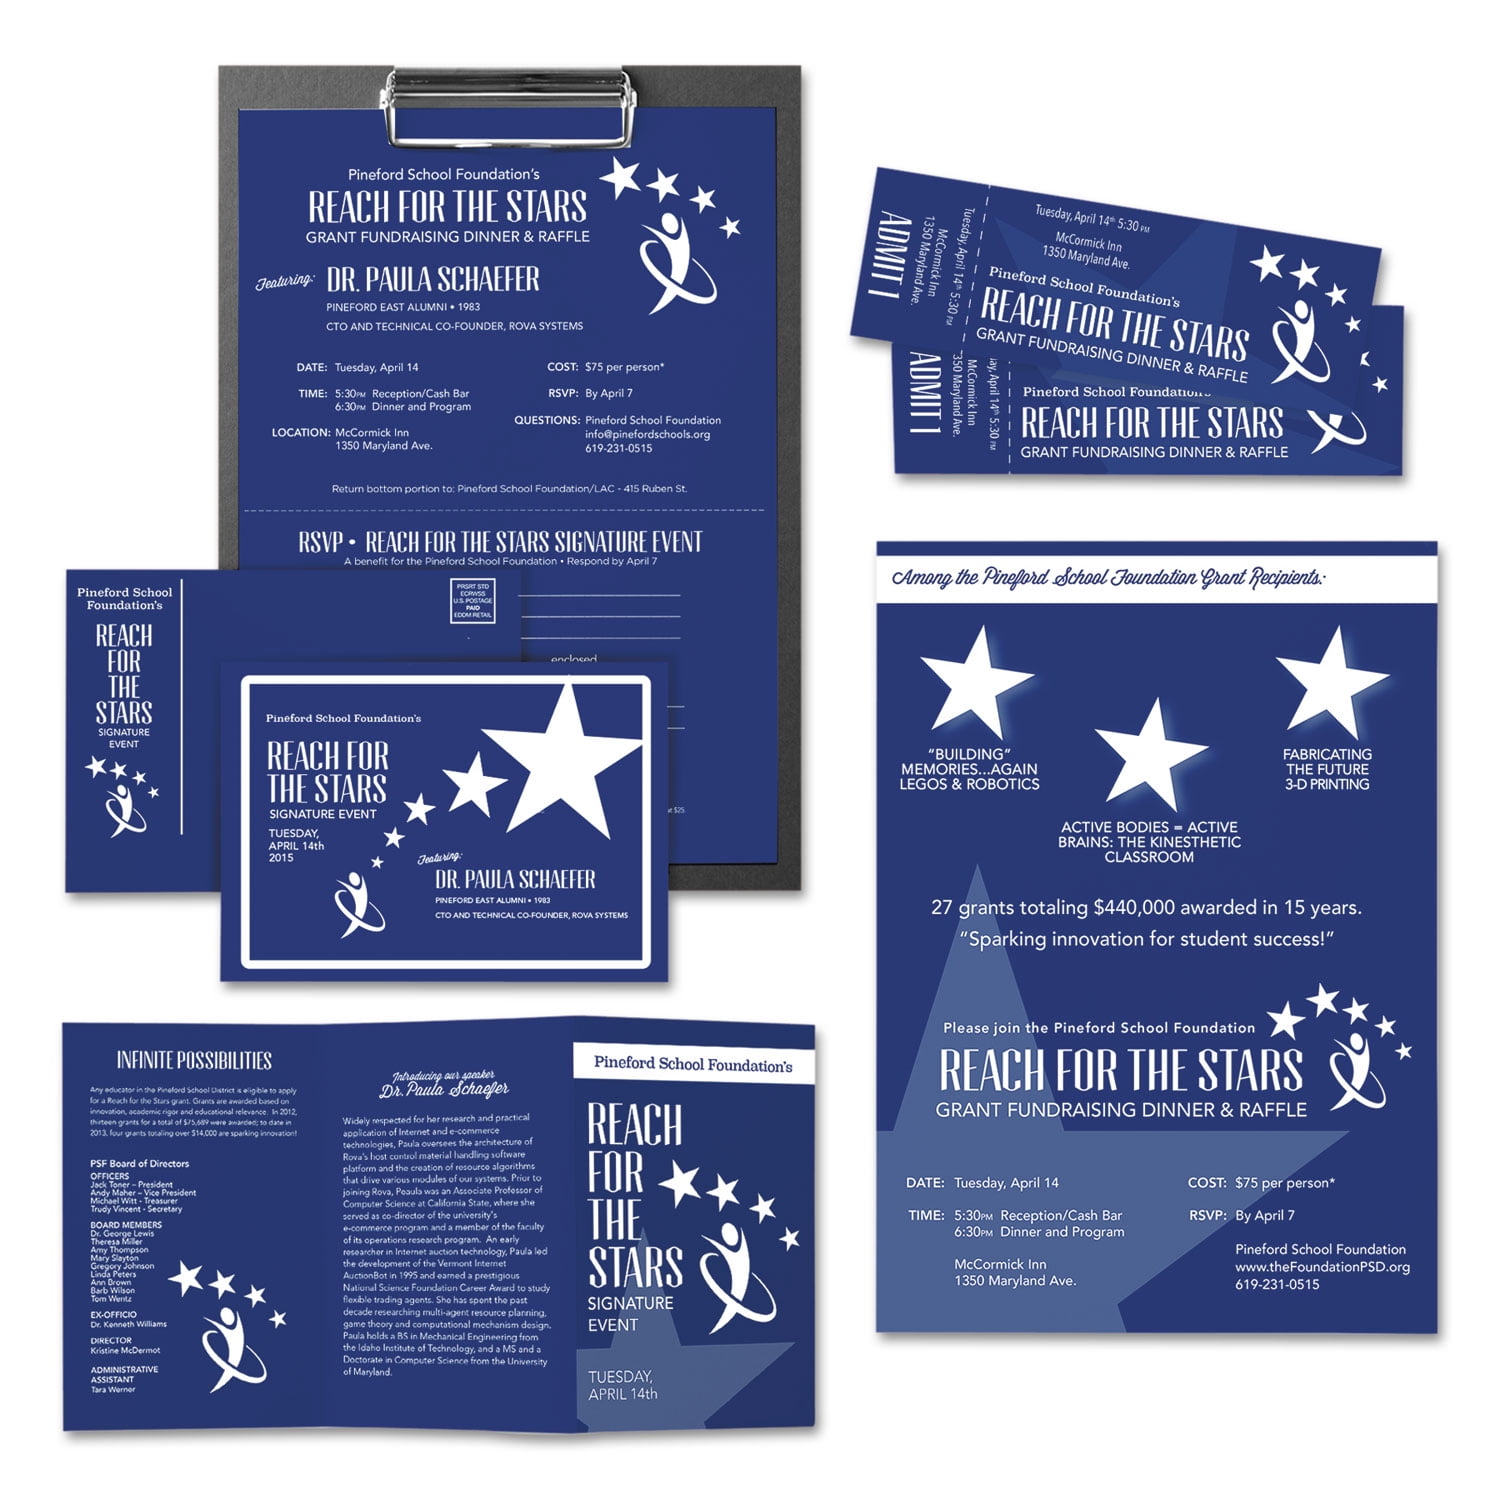 Blast-Off Blue™, 8.5 ” x 11”, 65 lb/176 gsm, 250 Sheets, Colored Cardstock